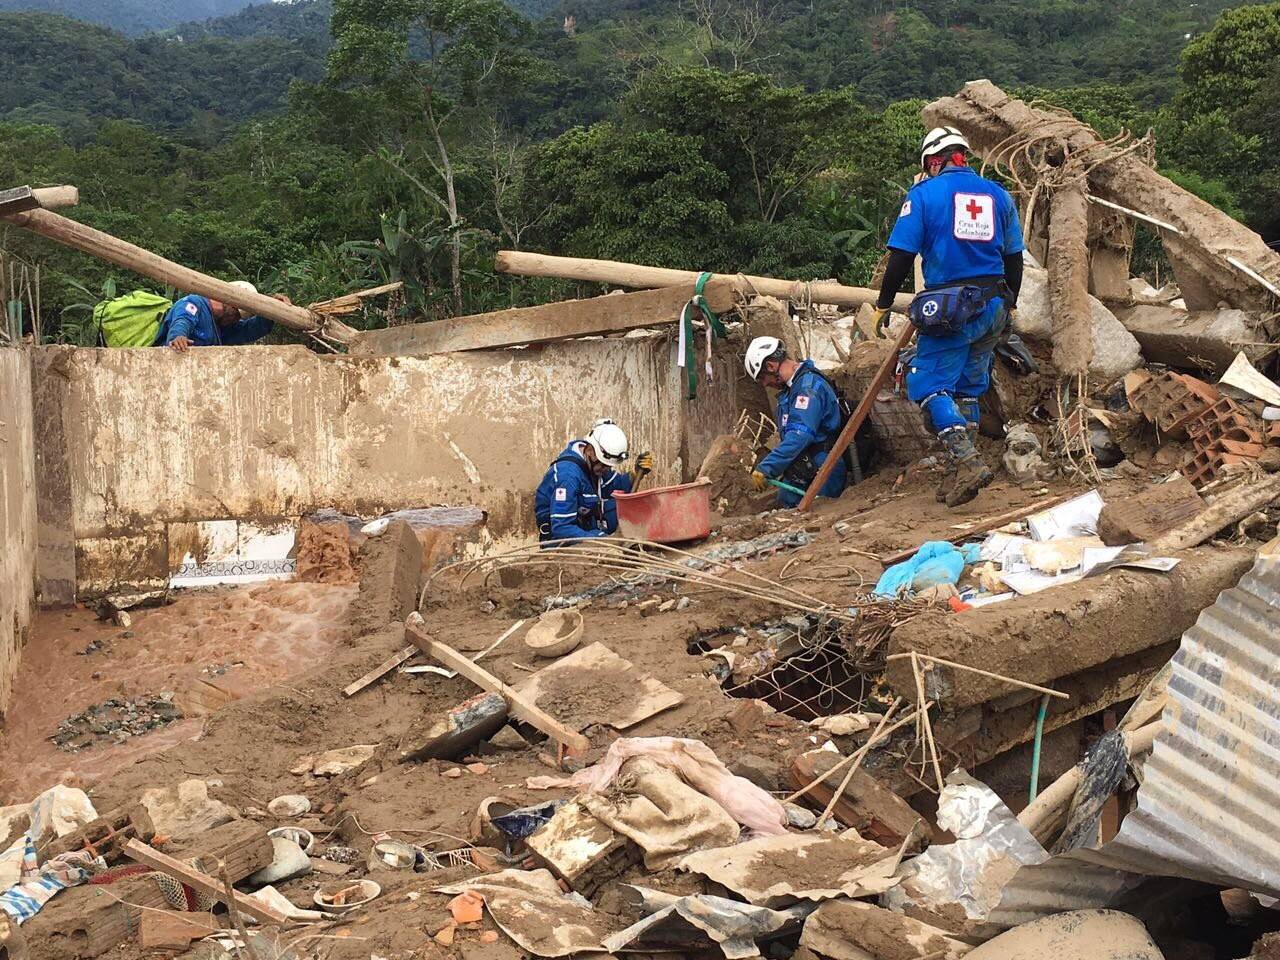 Colombia: Red Cross teams continue efforts after mudslide kills hundreds